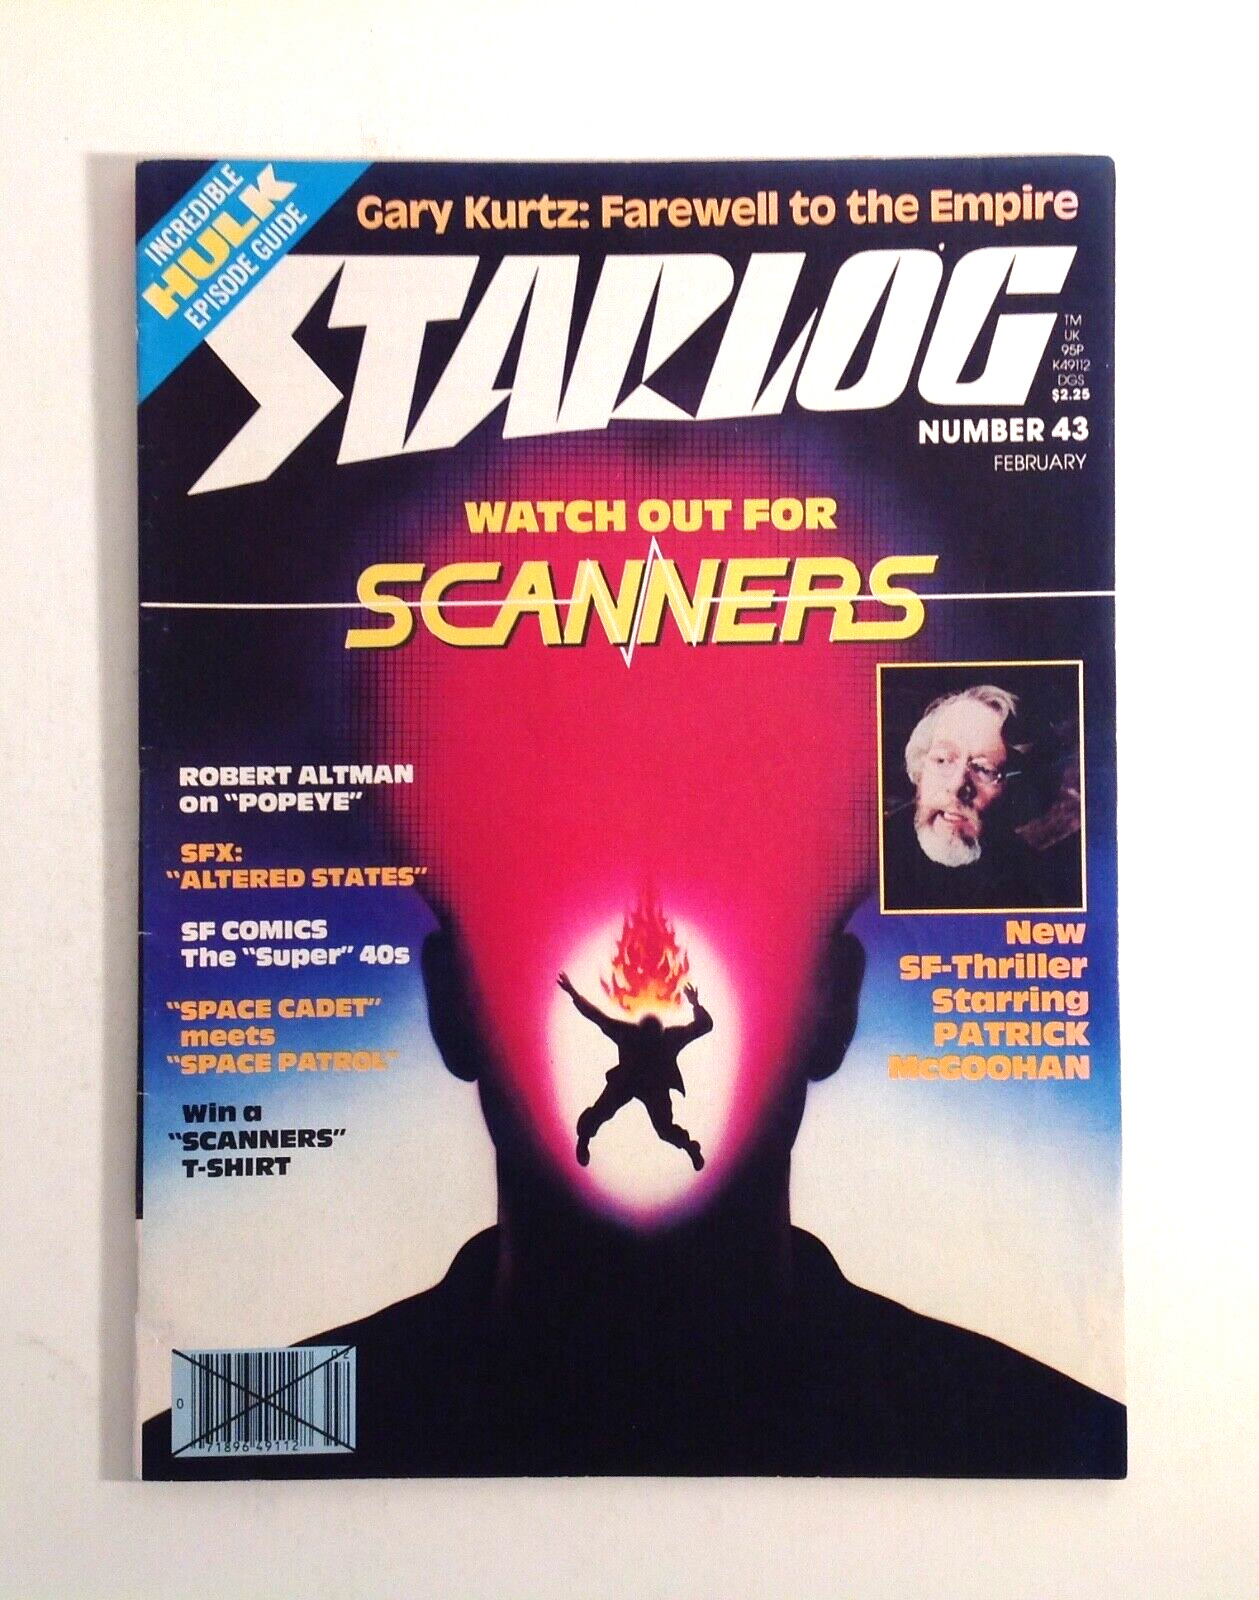 Starlog Magazine February 1981 #43 Scanners Cover Science Fiction